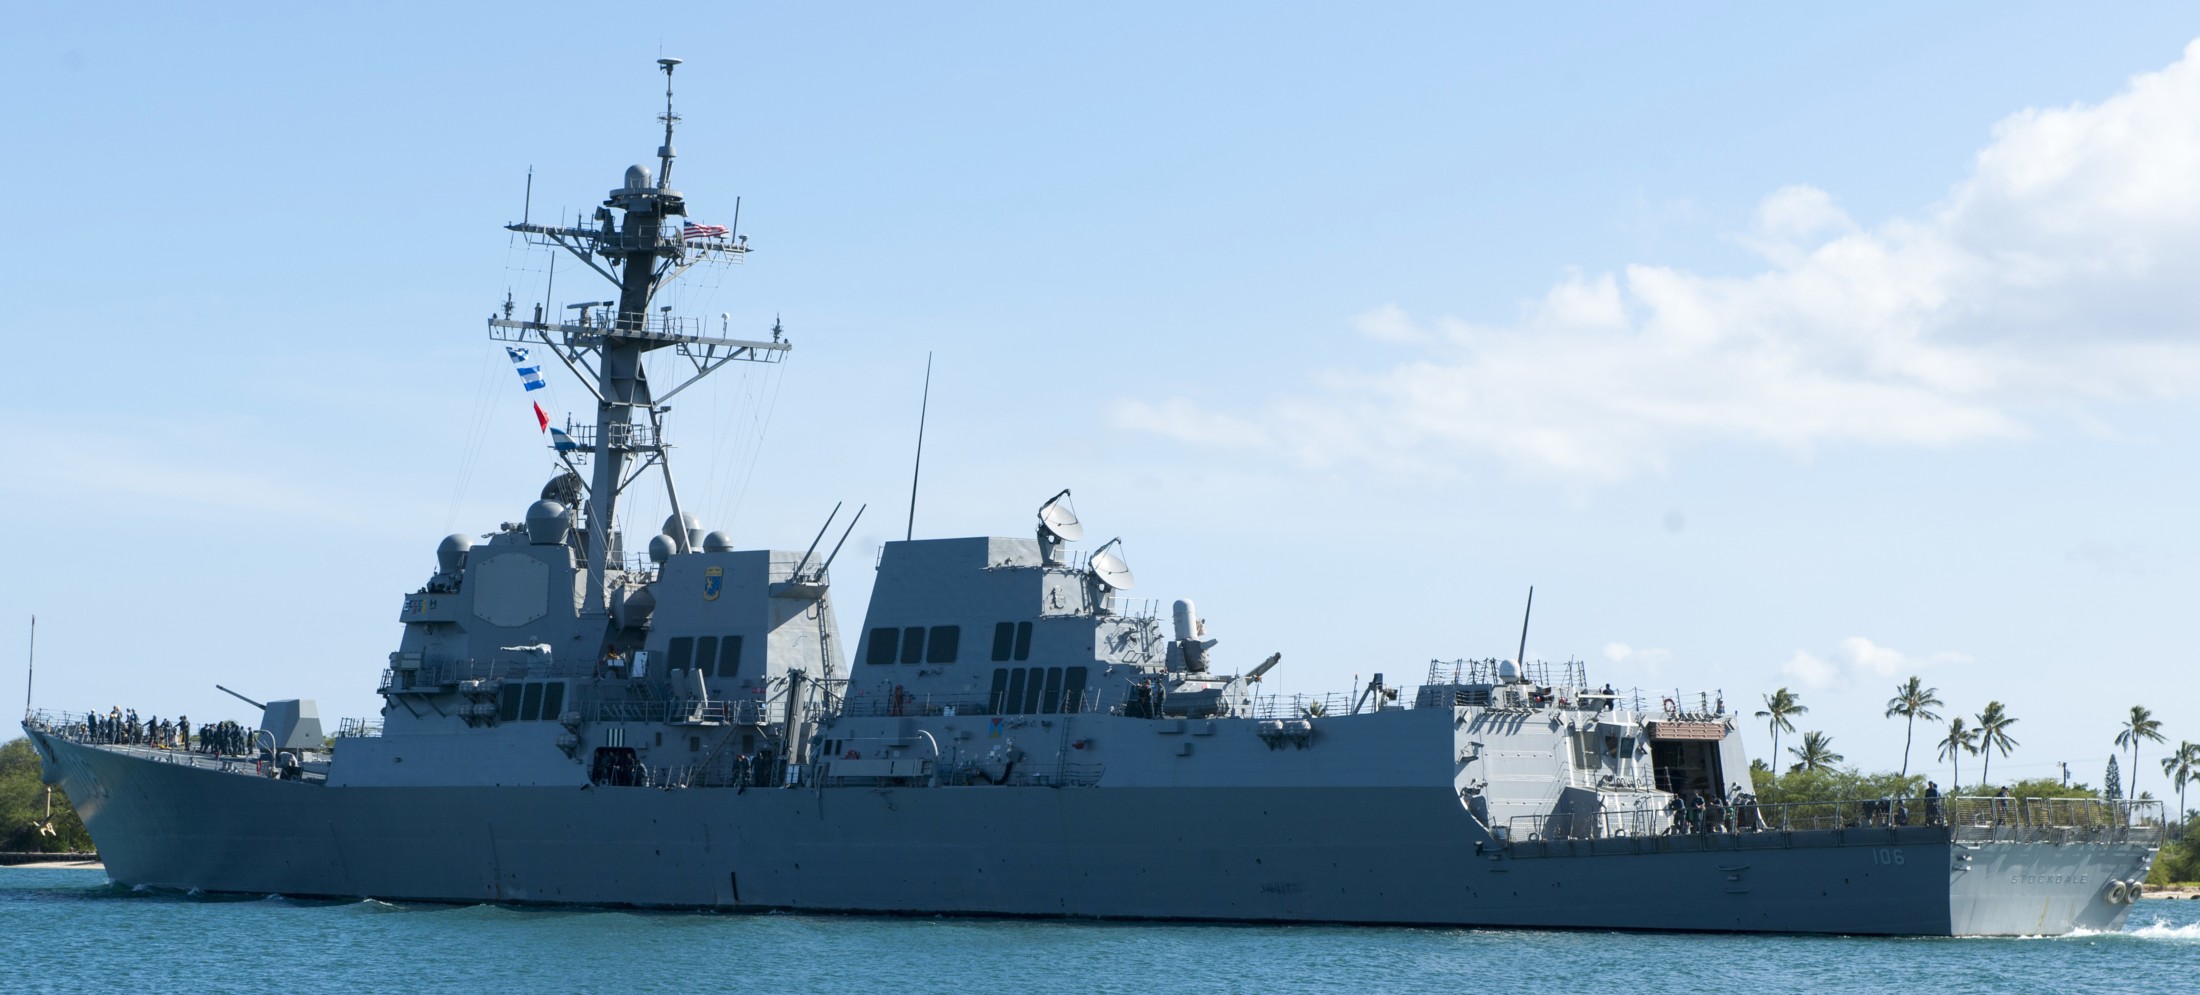 ddg-106 uss stockdale arleigh burke class guided missile destroyer aegis us navy joint base pearl harbor hickam hawaii 94